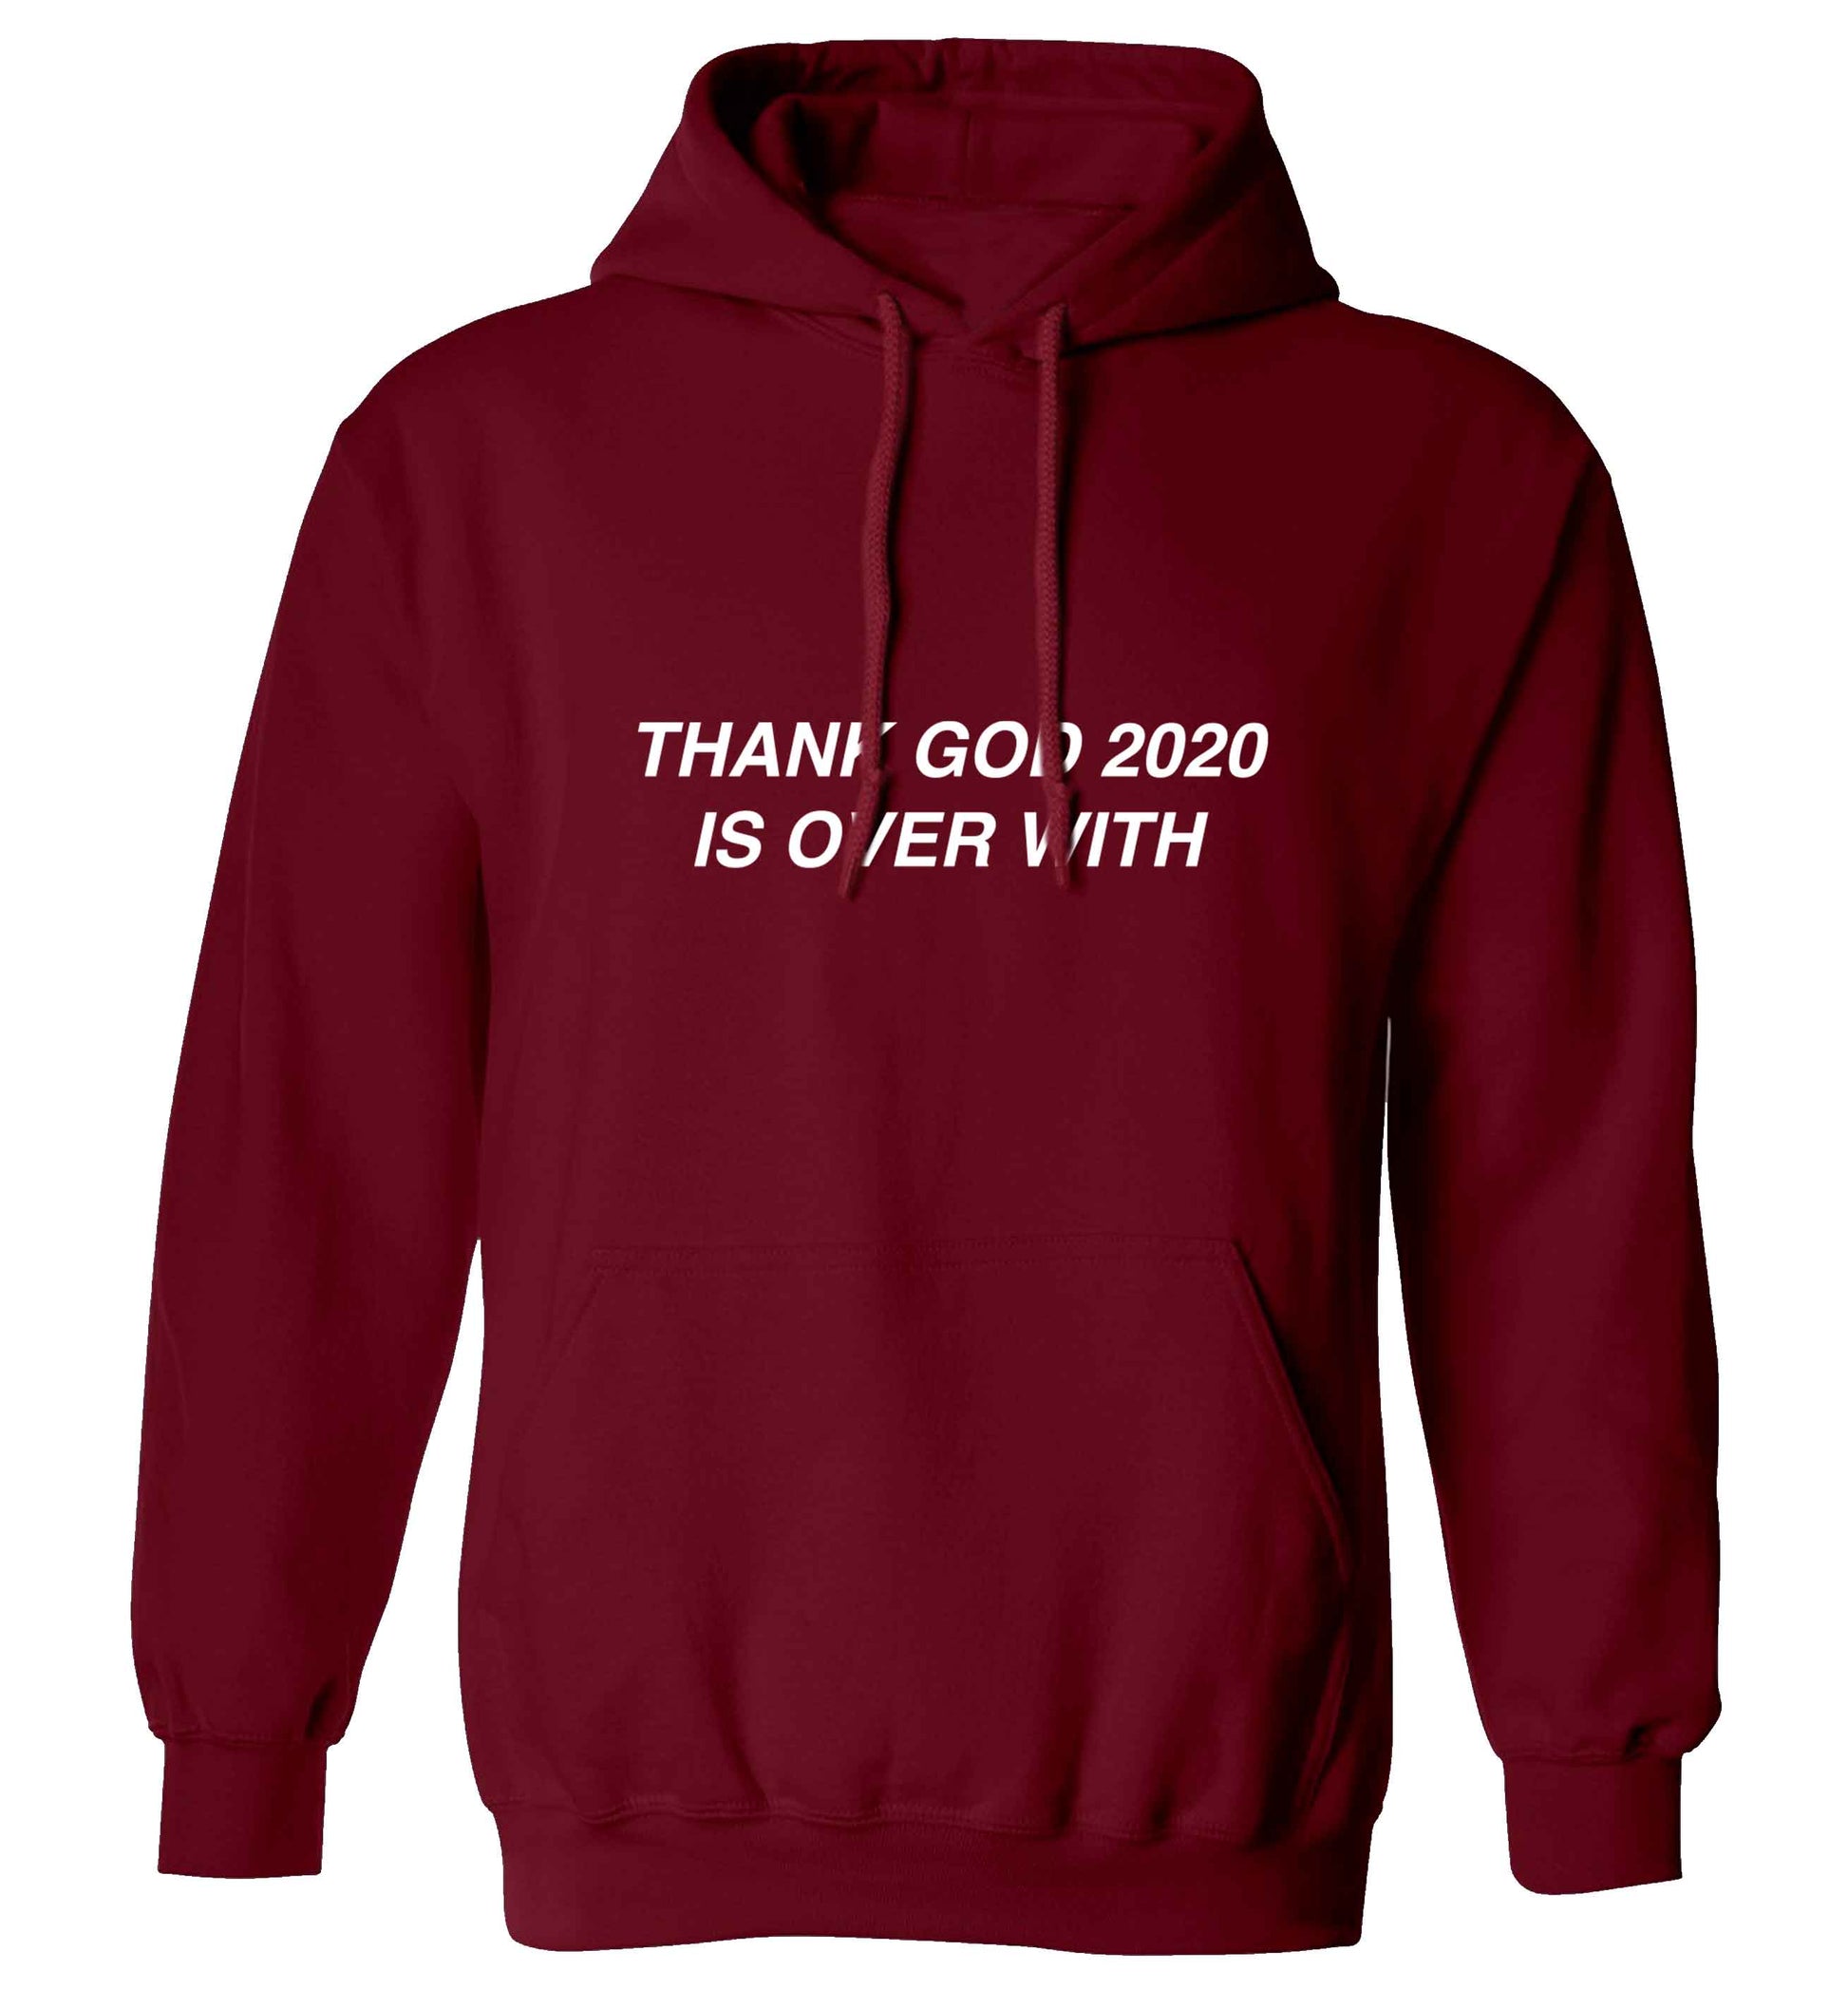 Thank god 2020 is over with adults unisex maroon hoodie 2XL